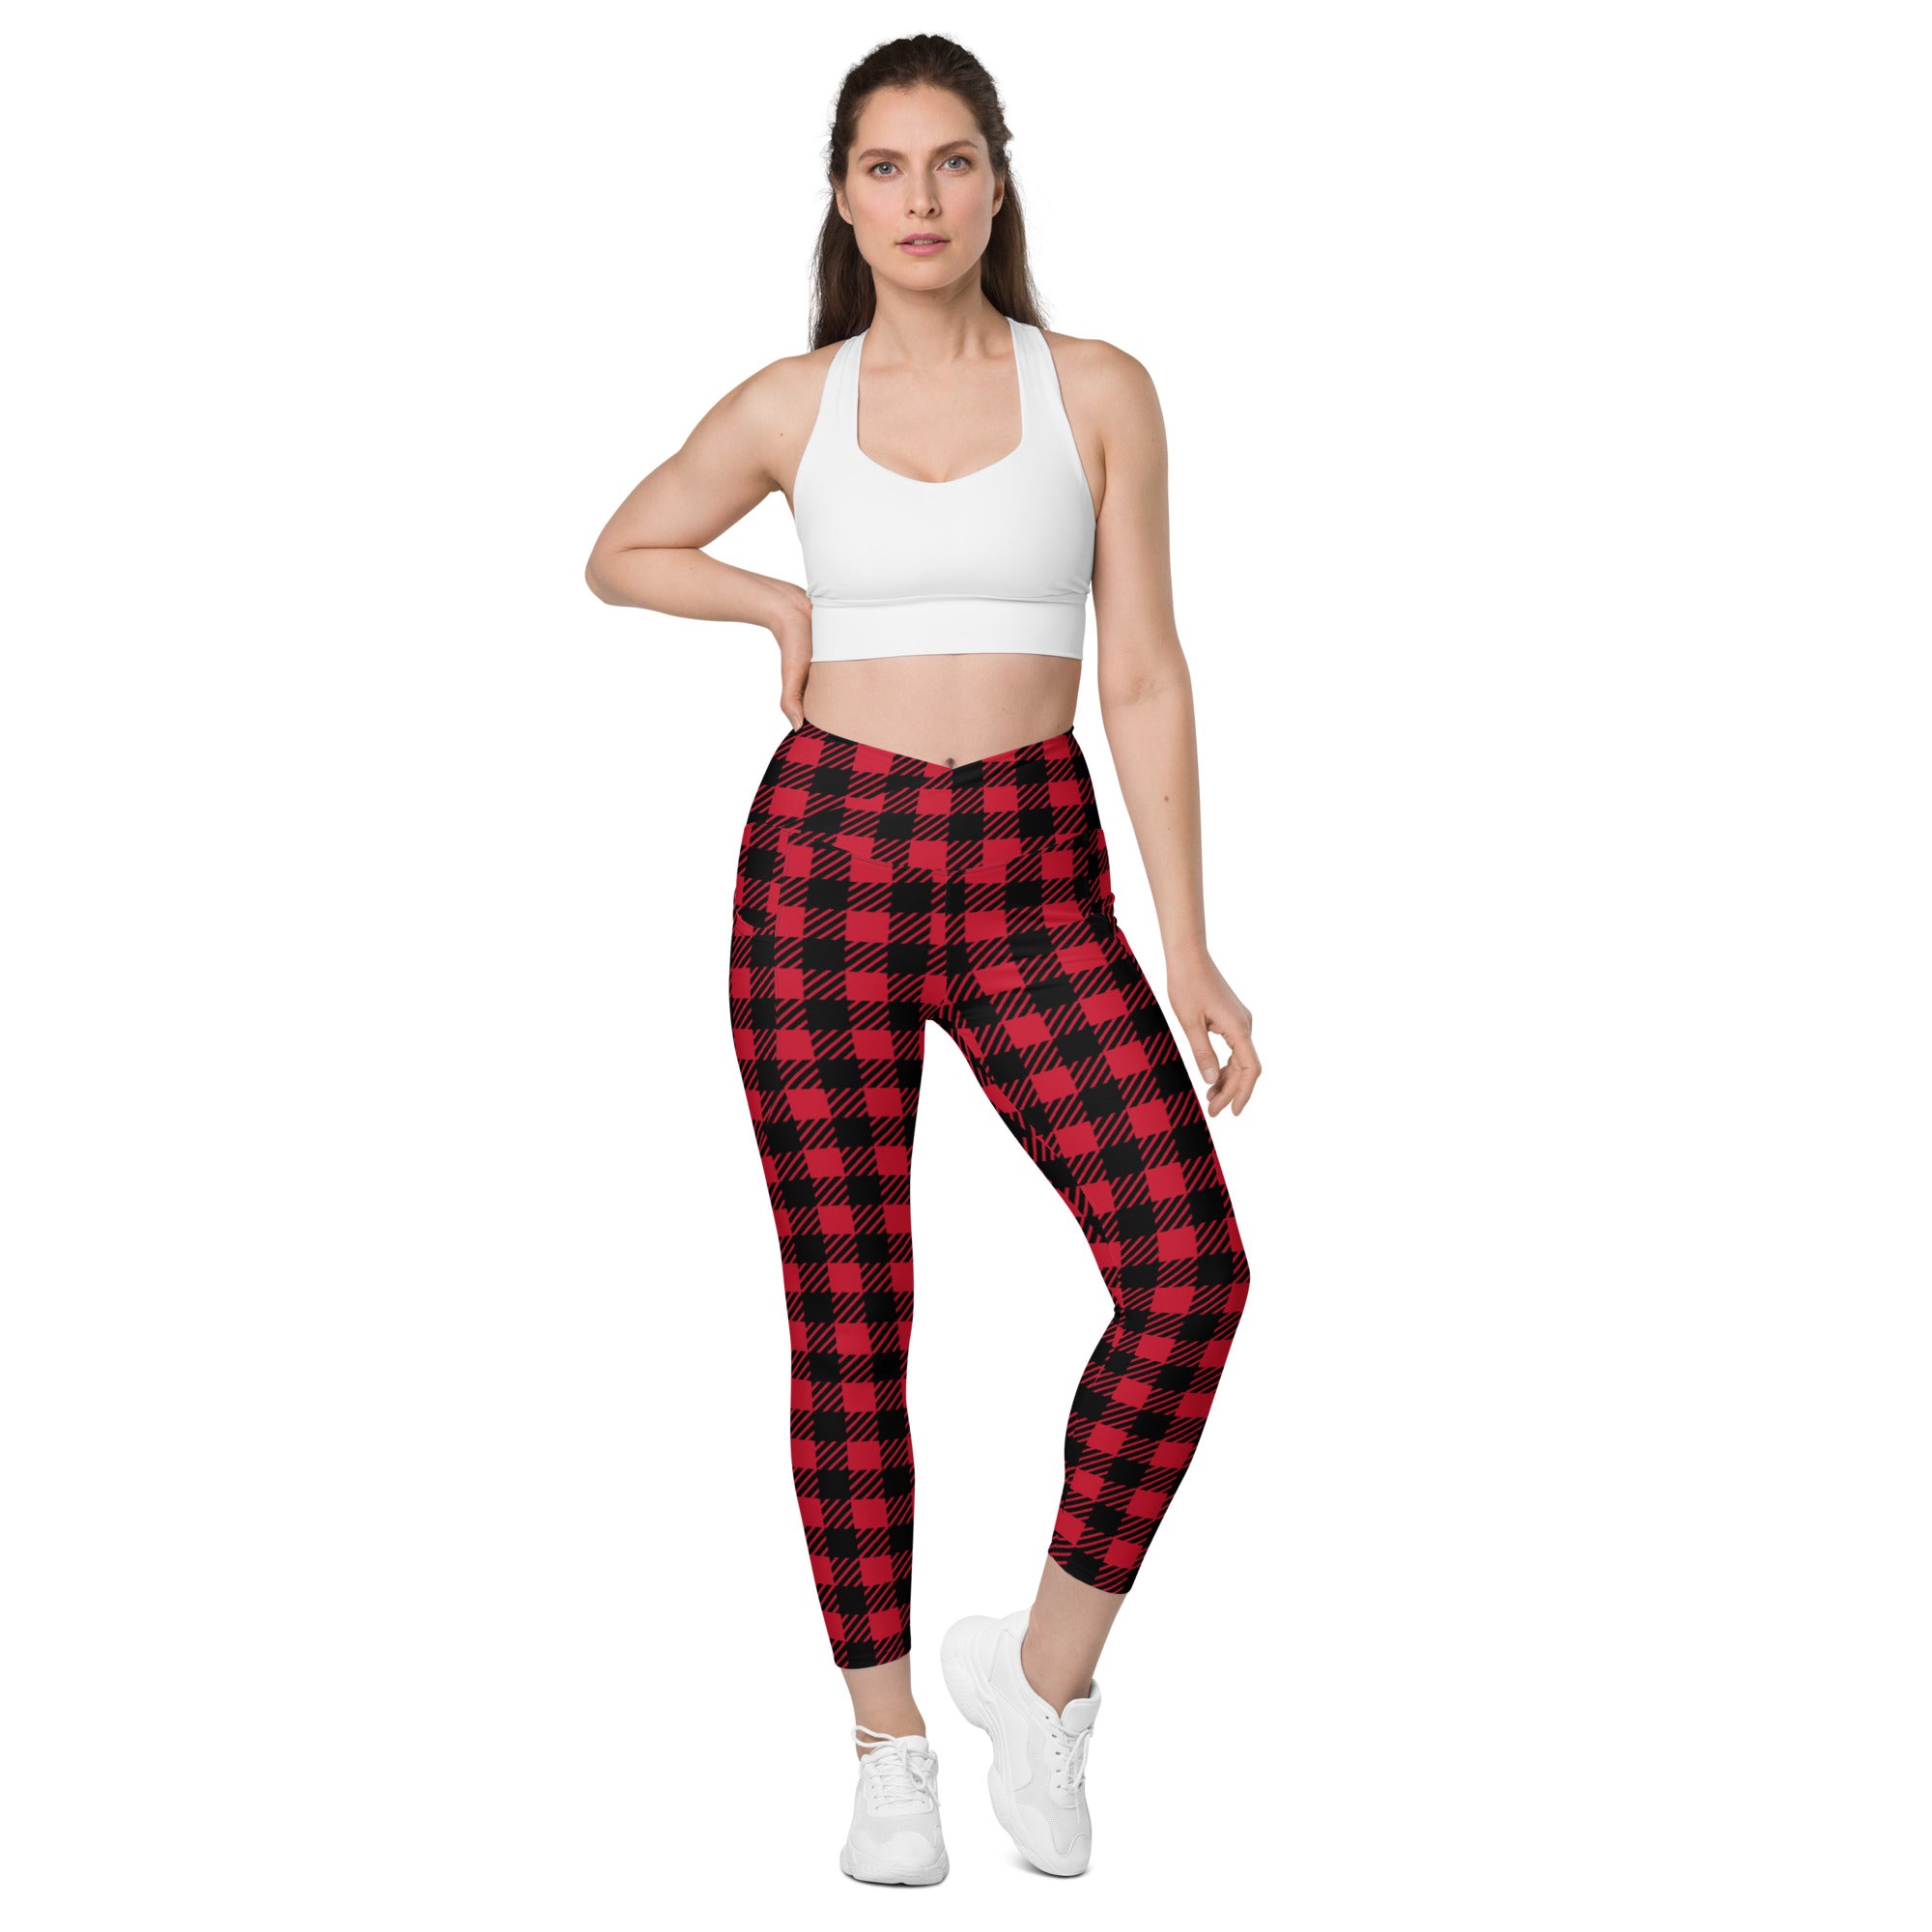 Red Plaid Print Women's Tights, Best Plaid Print Women's Crossover Leggings  With Pockets For Ladies - Made in USA/EU/MX